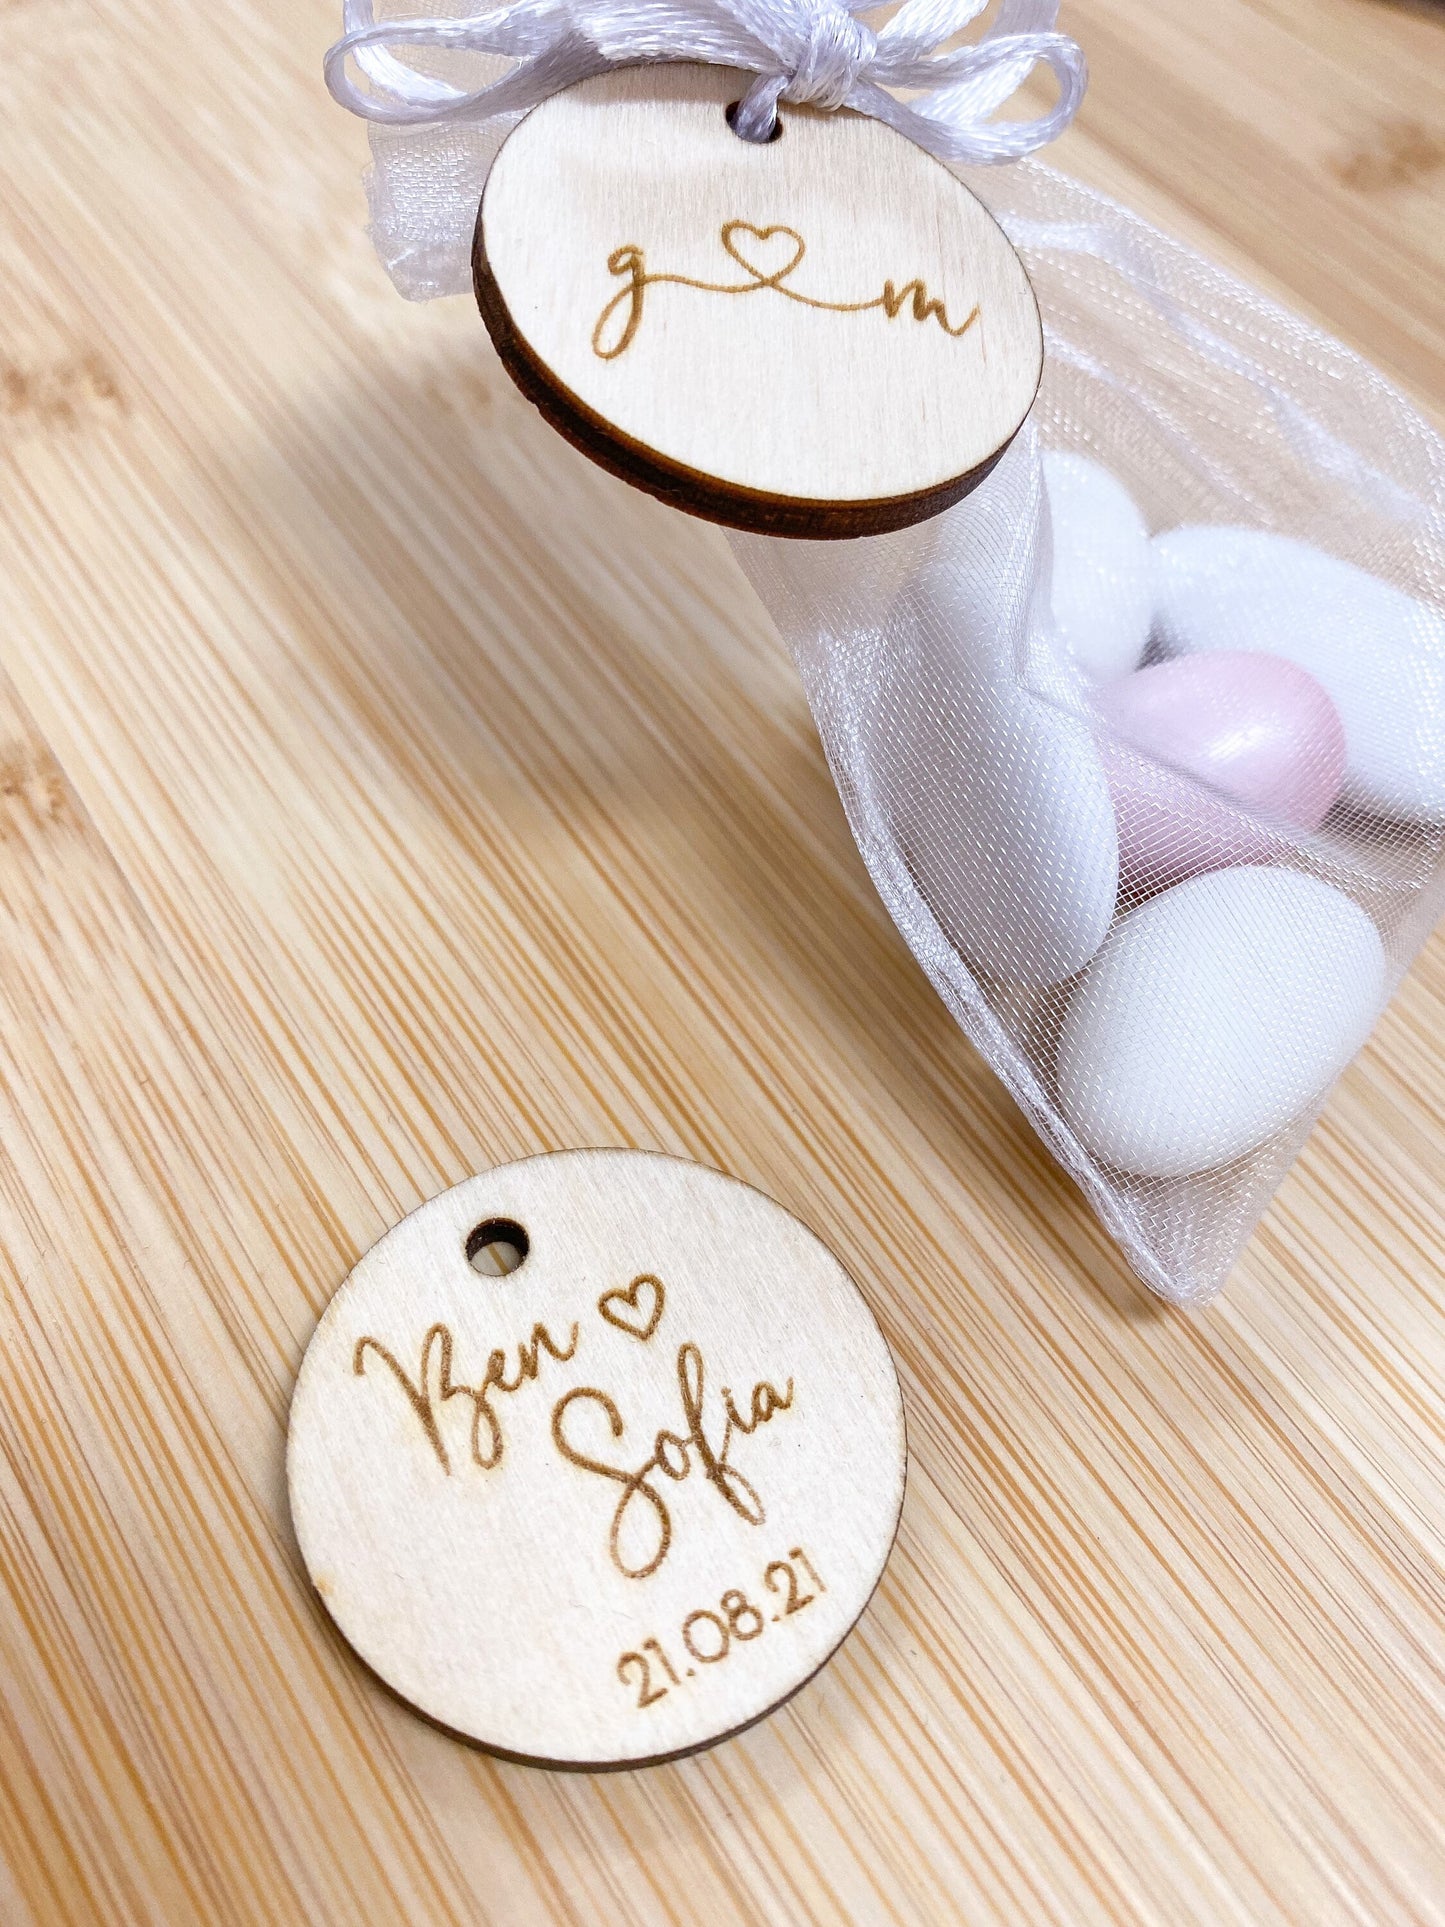 Personalized tags - 15 pieces wooden tags with engraved names